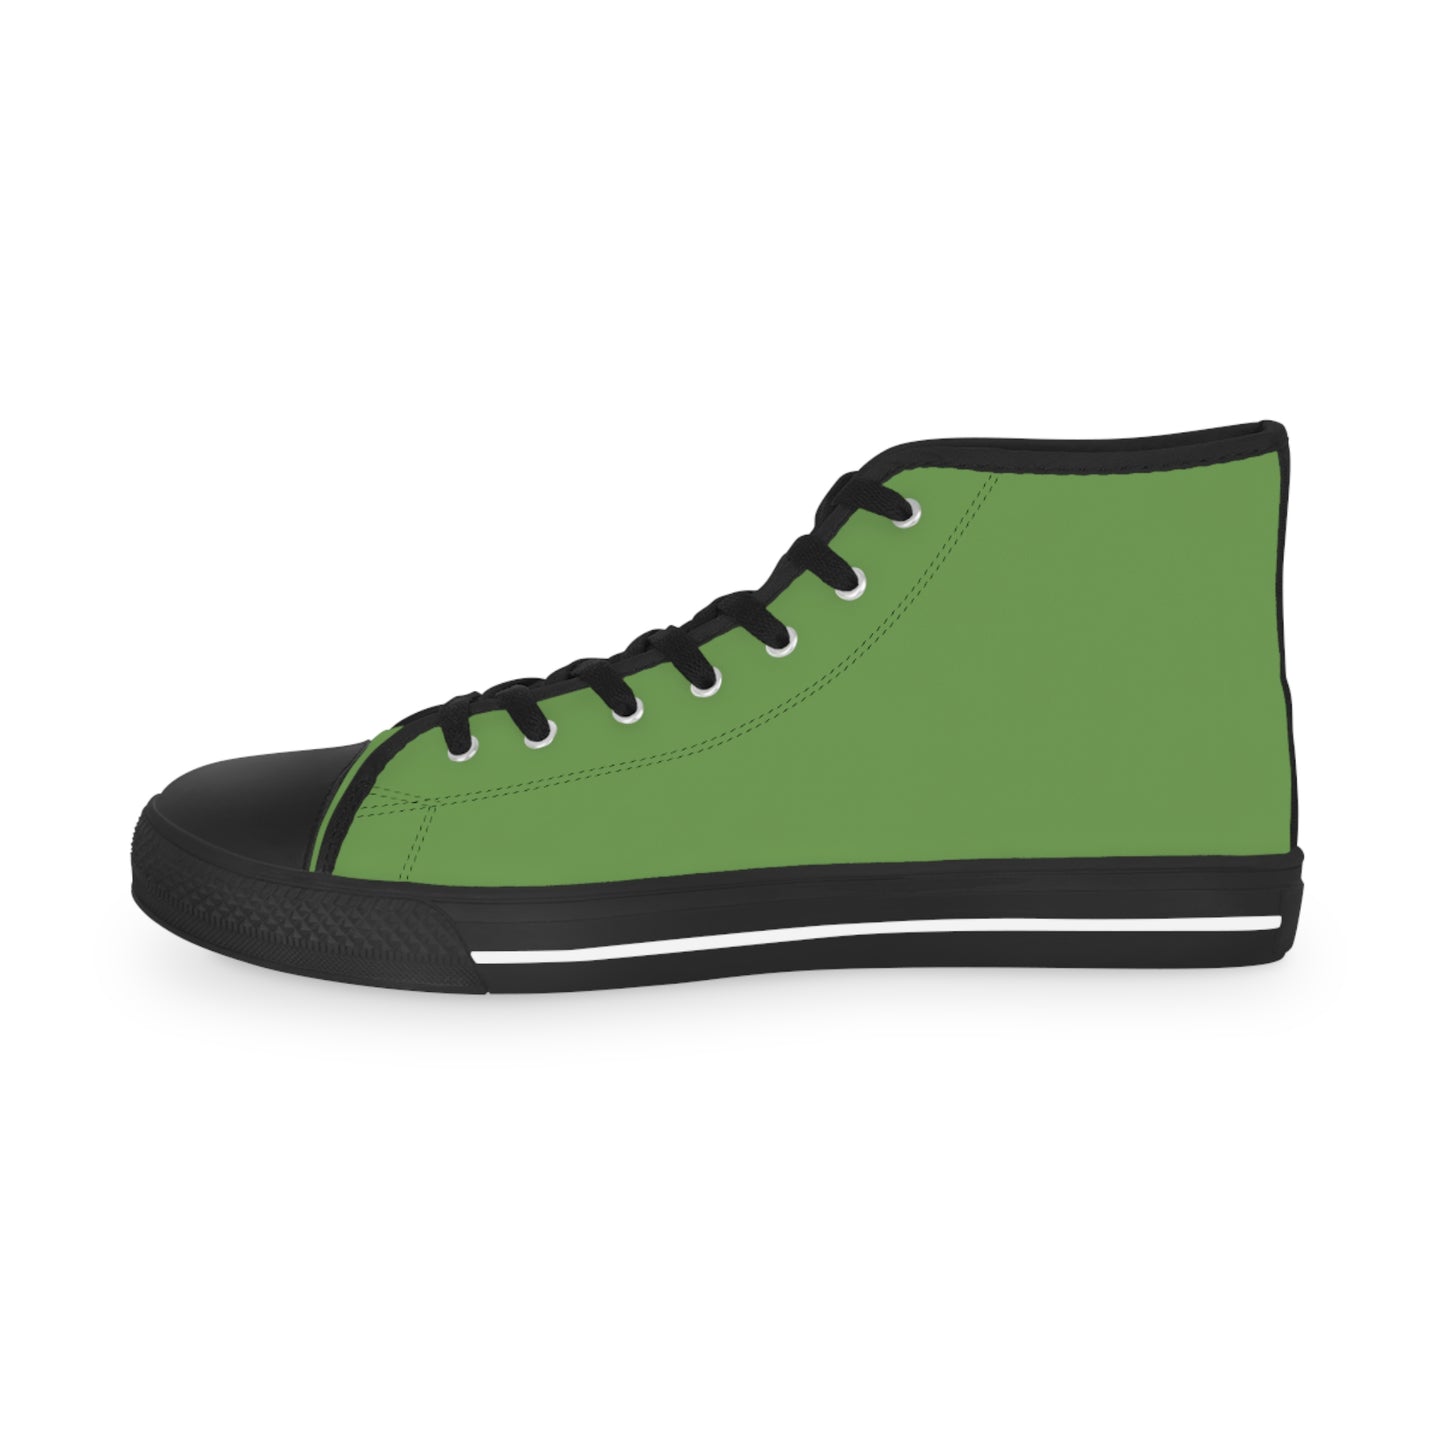 Men's High Top Sneakers - Dark Olive US 14 White sole